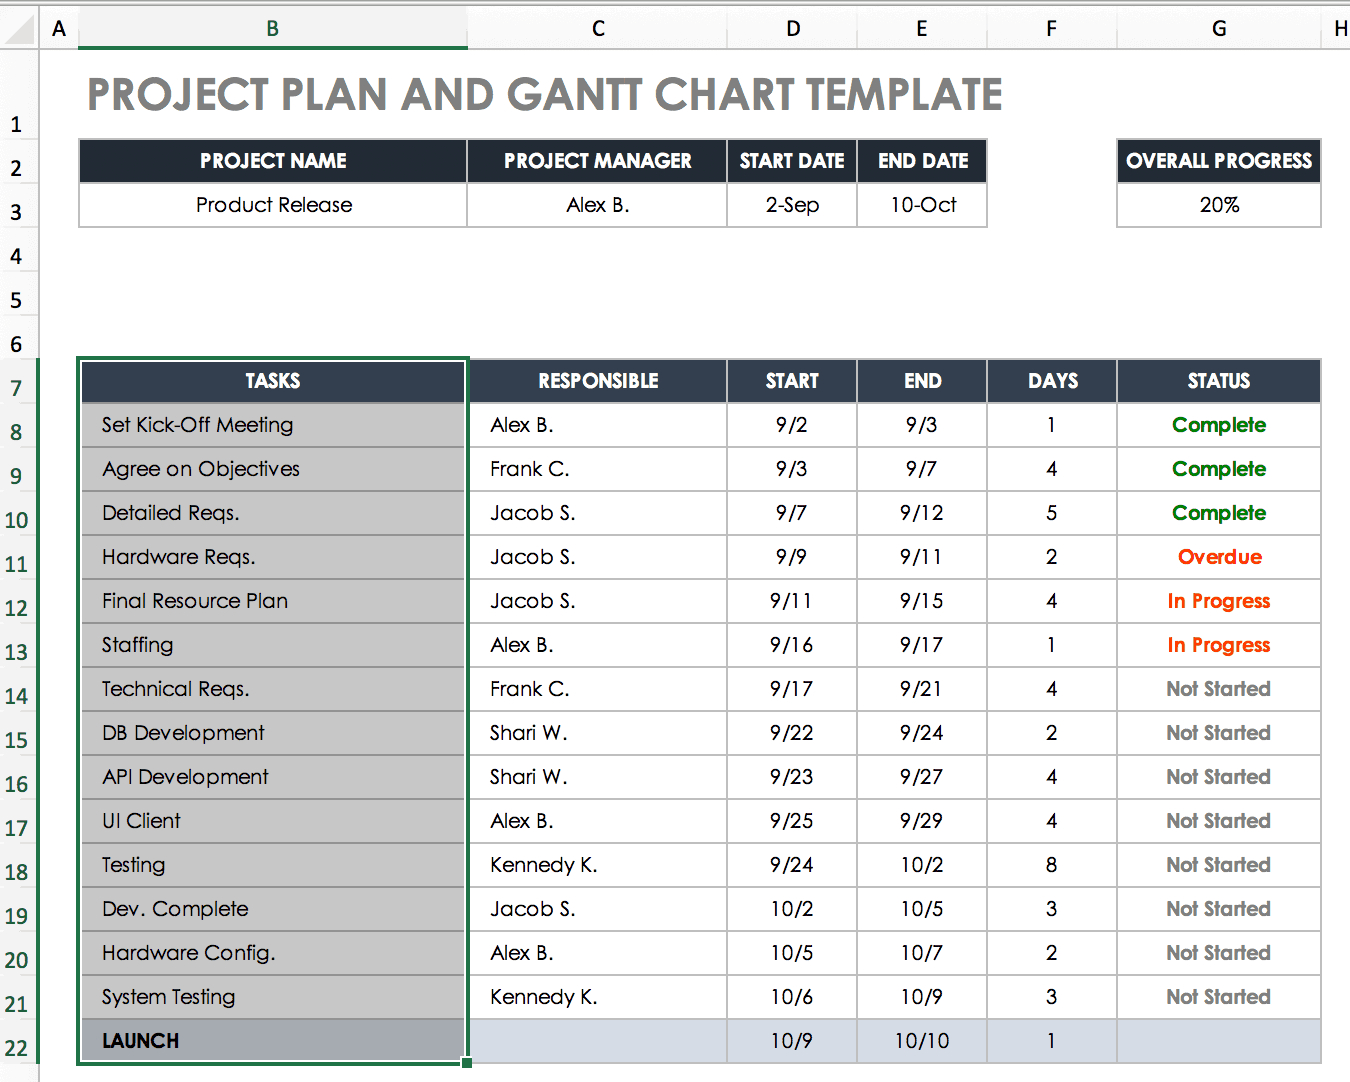 Create A Gantt Chart In Excel: Instructions & Tutorial With Regard To Excel Gantt Chart Template 2013